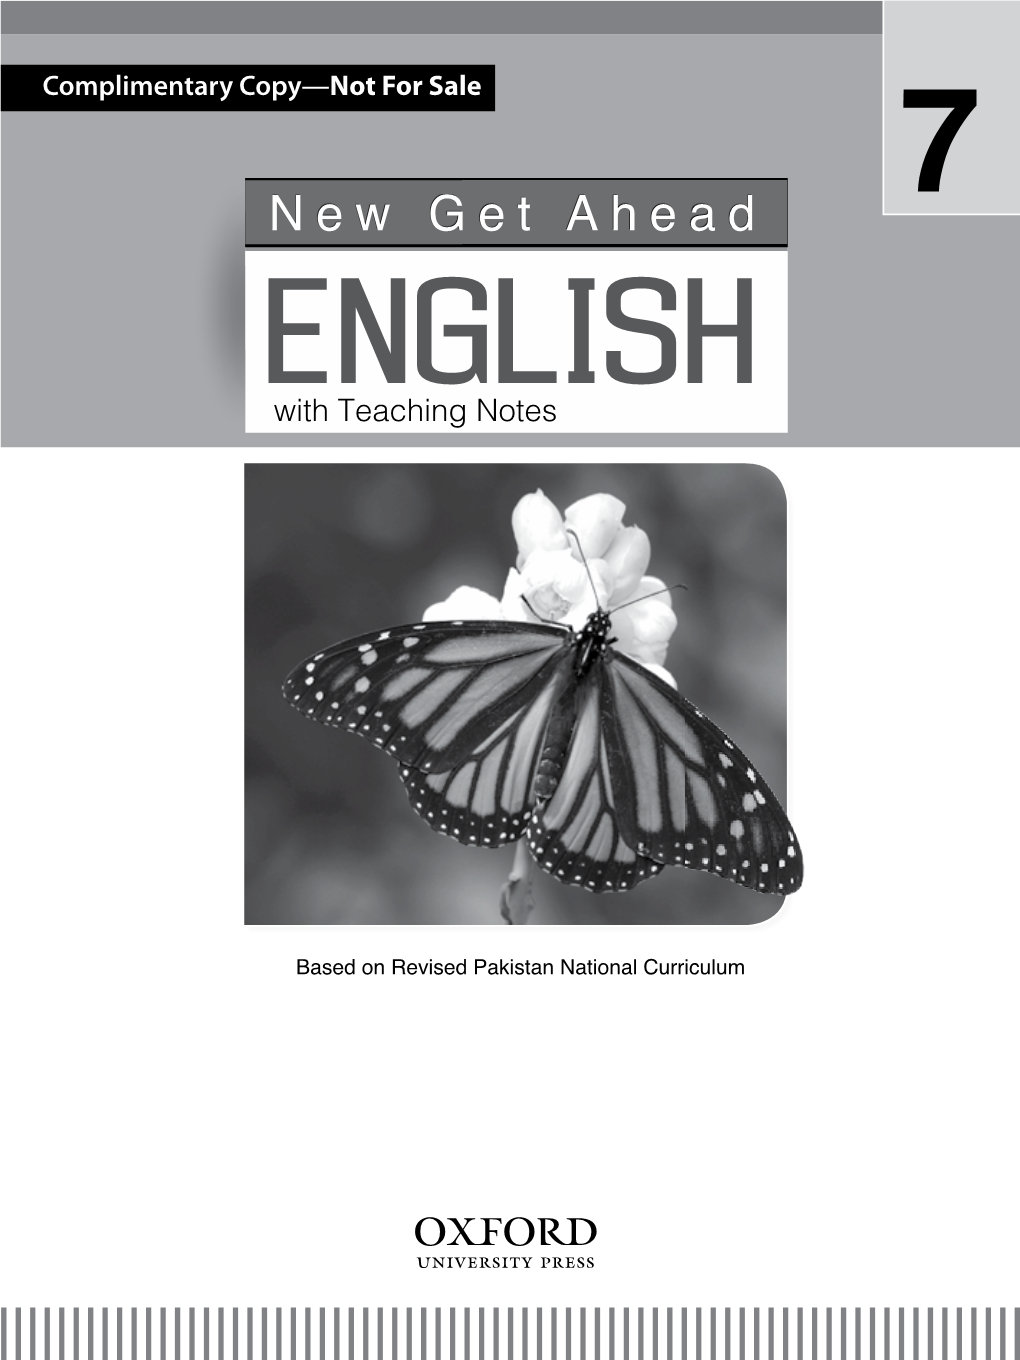 New Get Ahead 7 ENGLISH with Teaching Notes